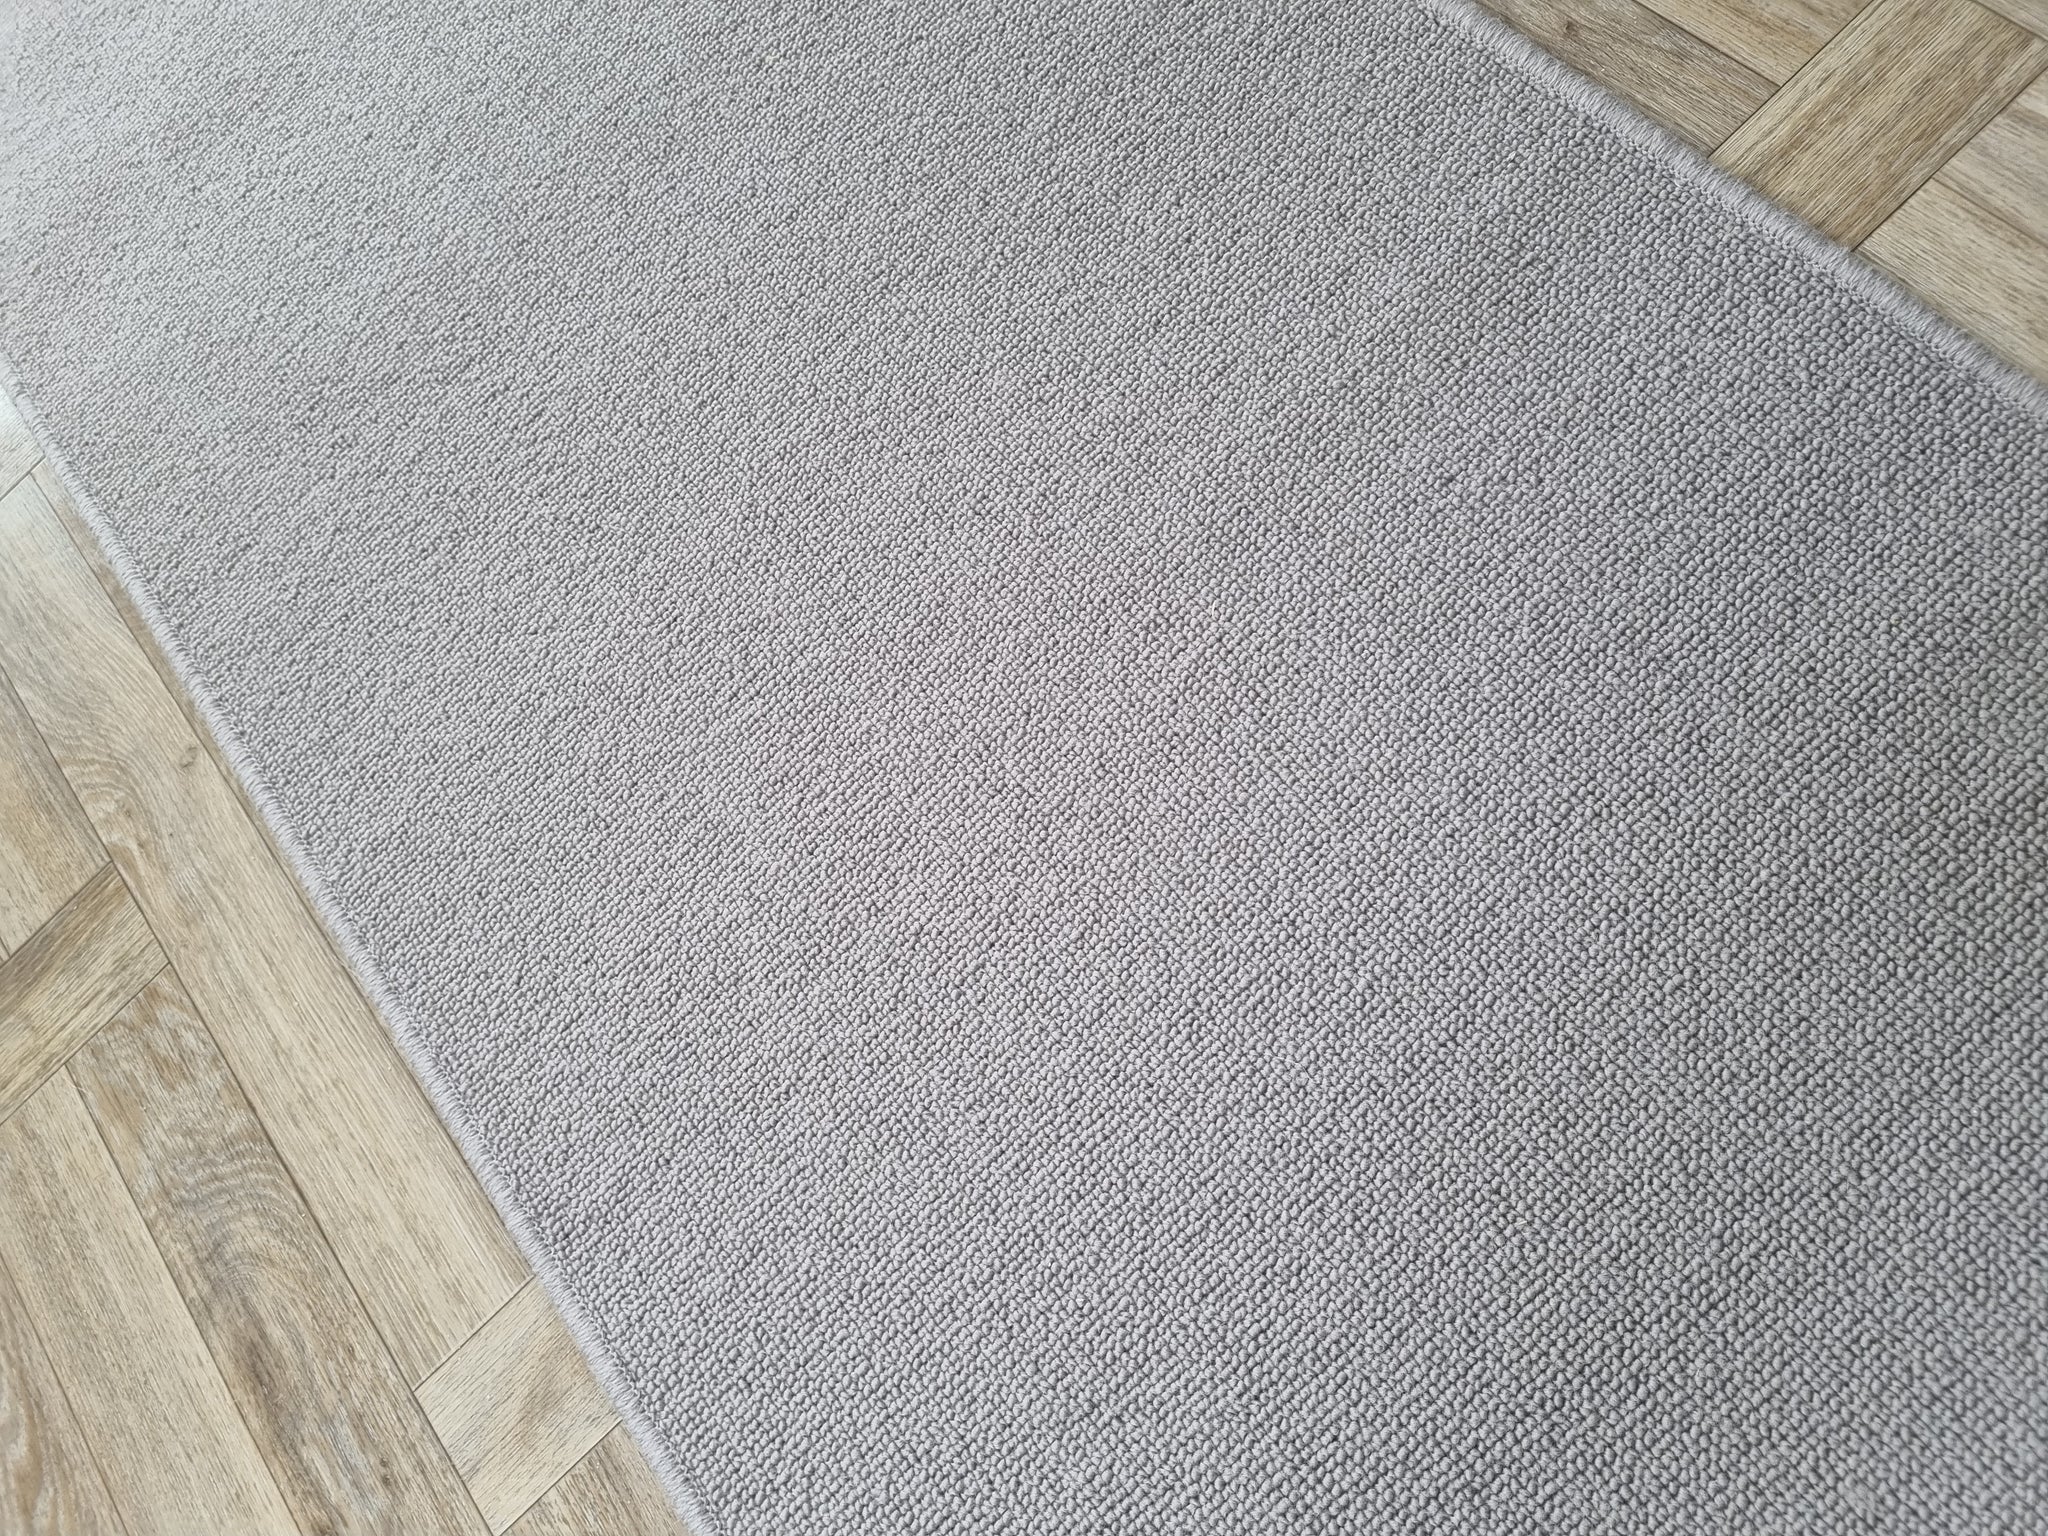 Cormar Pimlico Cement wool loop stair runner with whipped edge (replacement for Avebury)